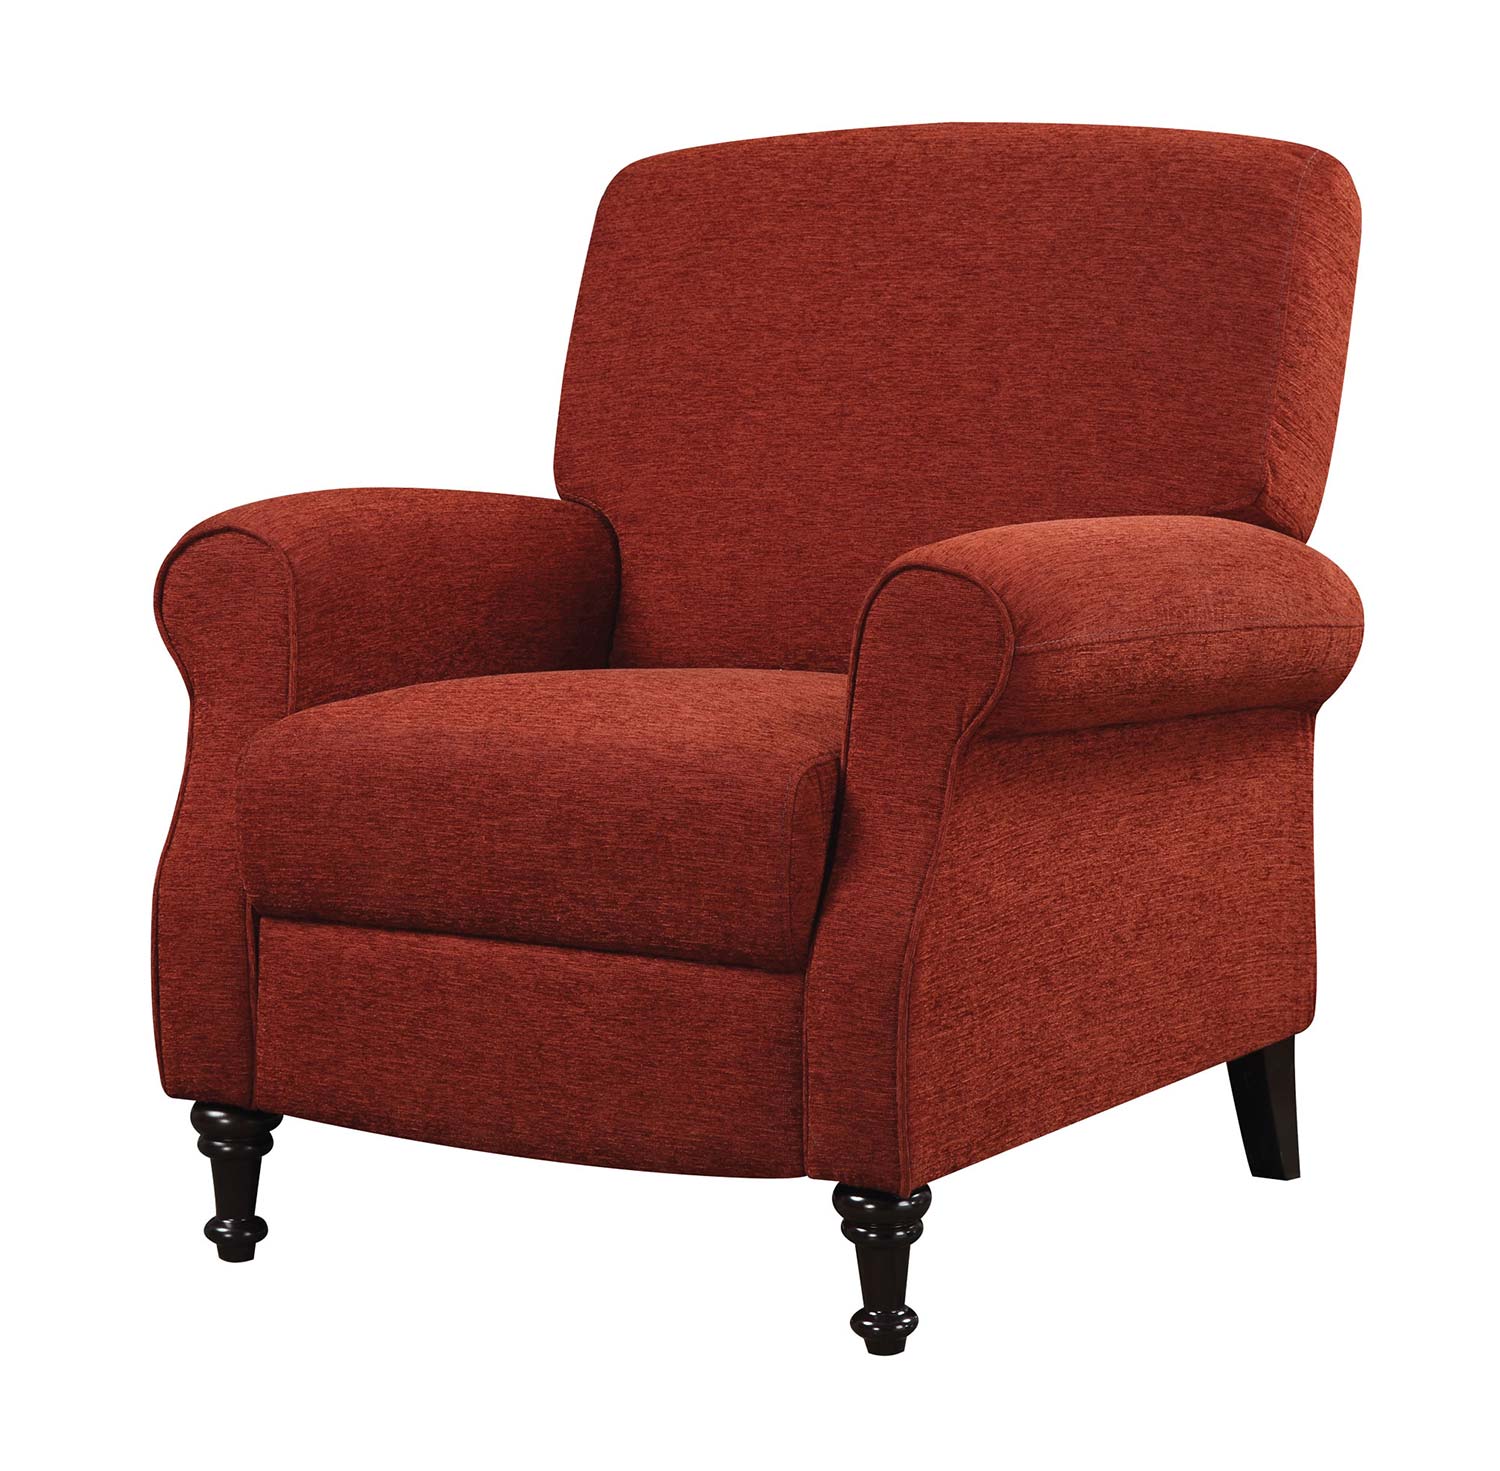 Coaster 600326 Push-Back Recliner - Wine Red